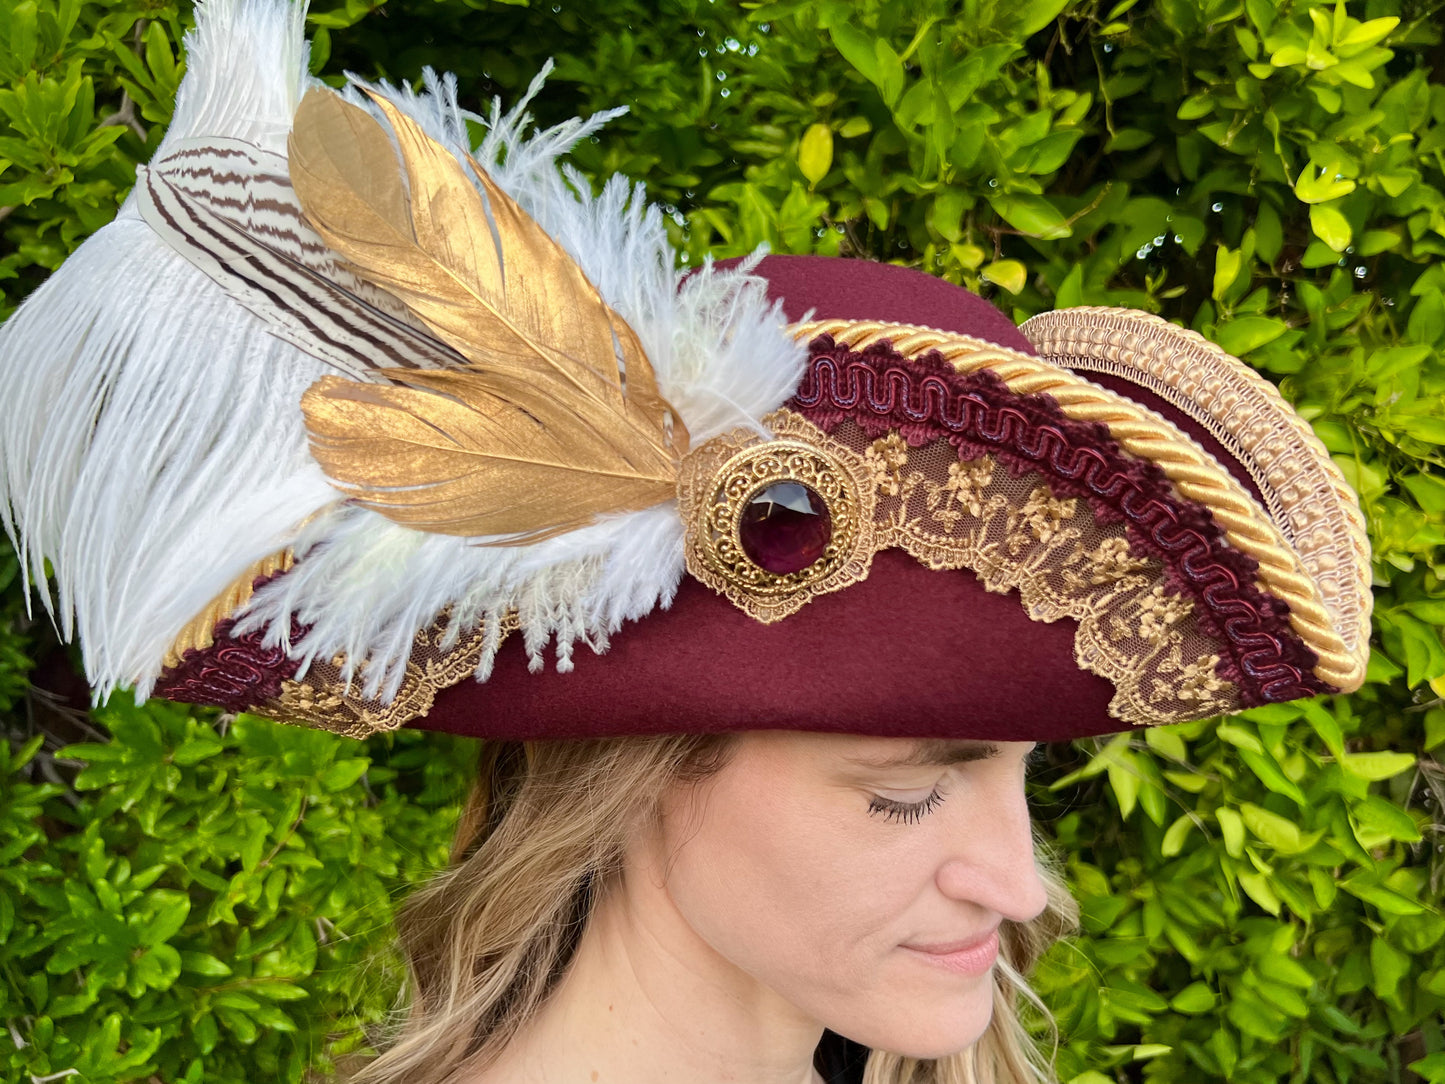 Bicorn Hat 23" Maroon Wool Base with Gold Trim, Feathers, and Vintage Brooch